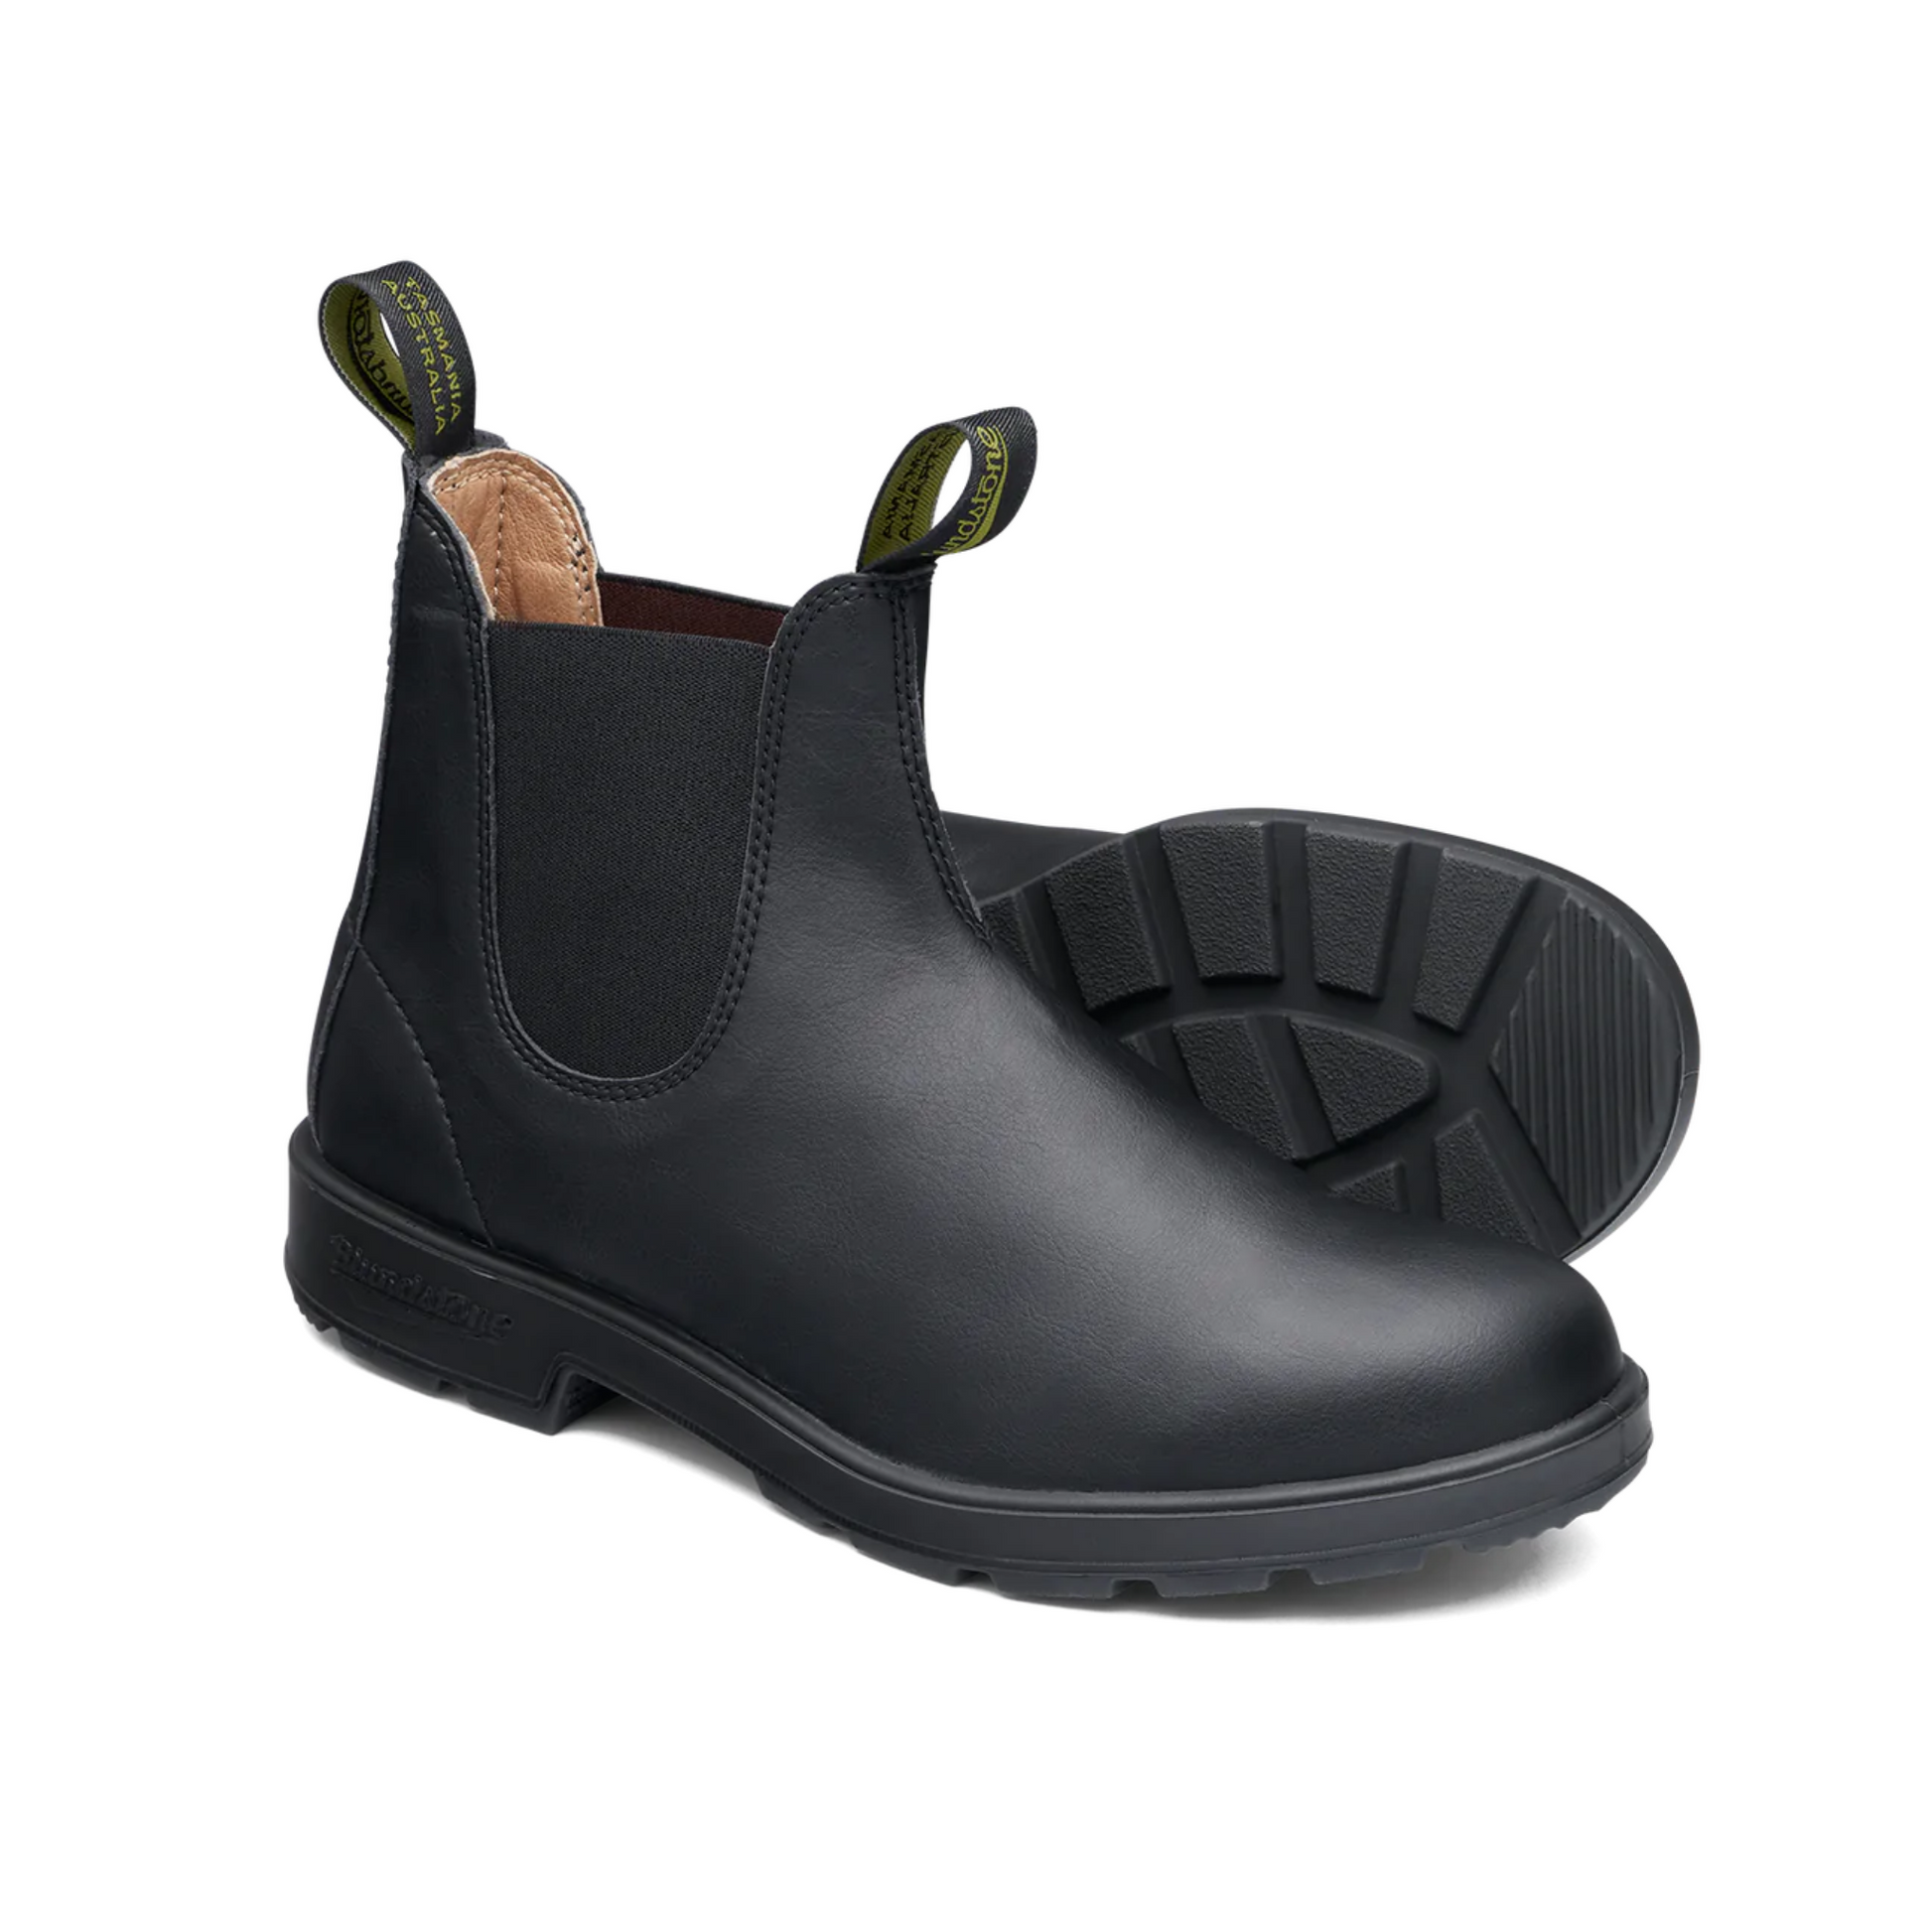 Front angled and bottom profiles of a pair of Blundstone Vegan Black #2115 Boots.